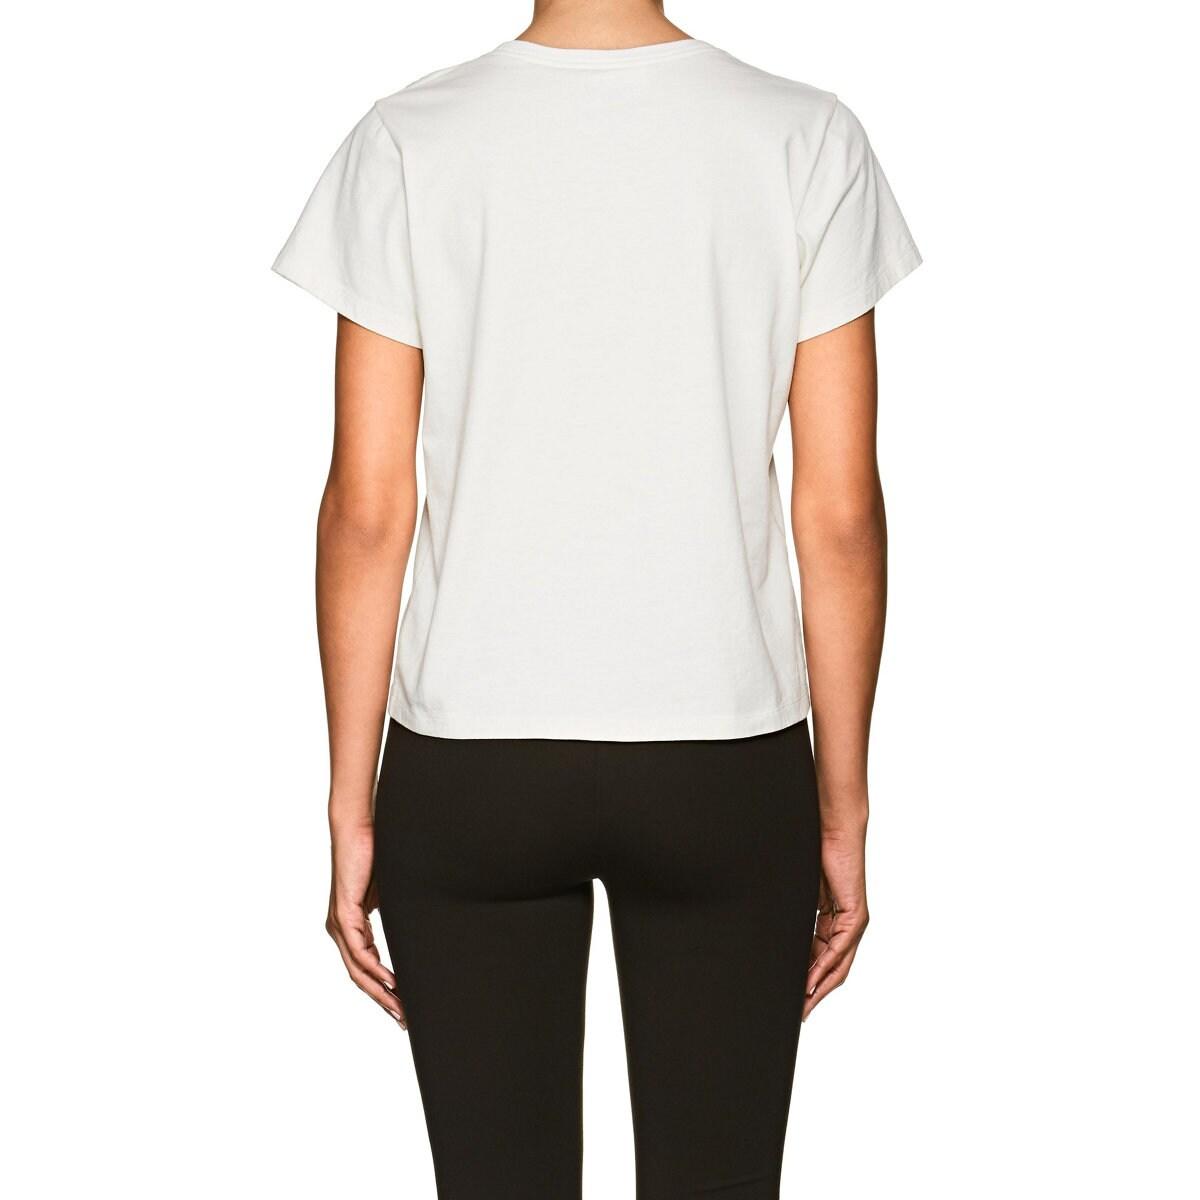 Marc Jacobs Love Embellished Cotton T-shirt in White - Lyst